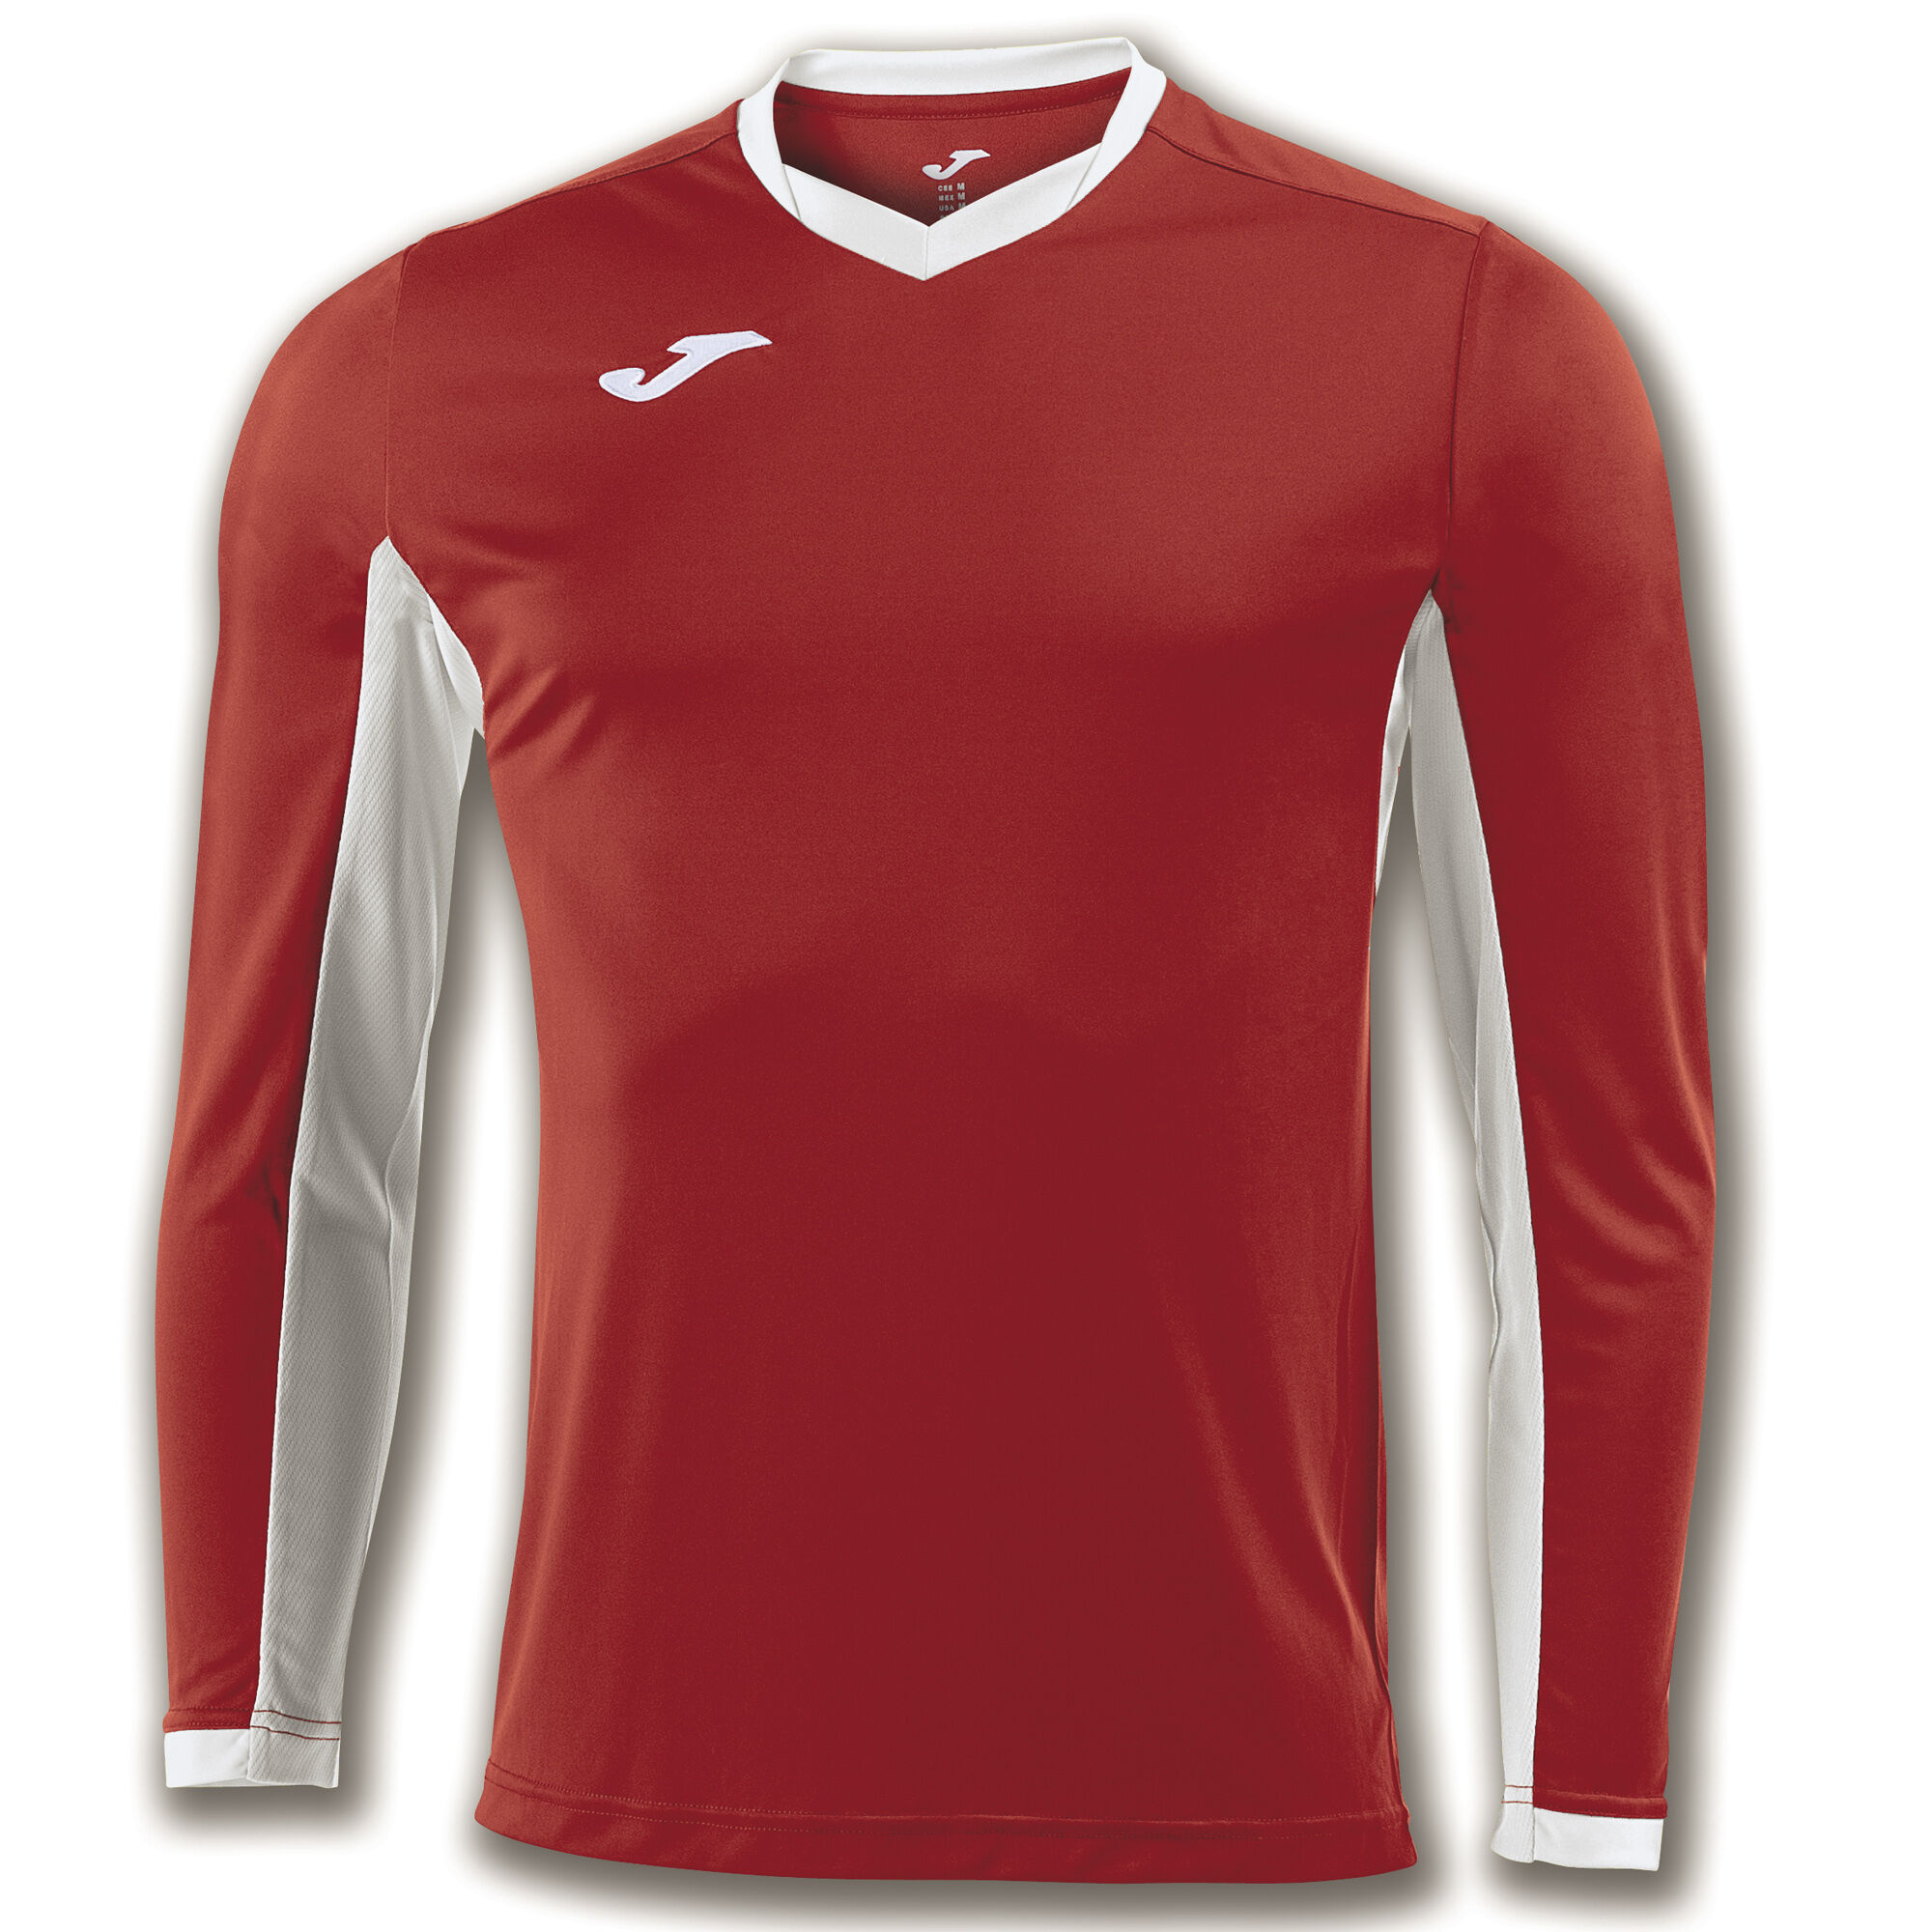 MAILLOT MANCHES LONGUES HOMME CHAMPIONSHIP IV ROUGE BLANC